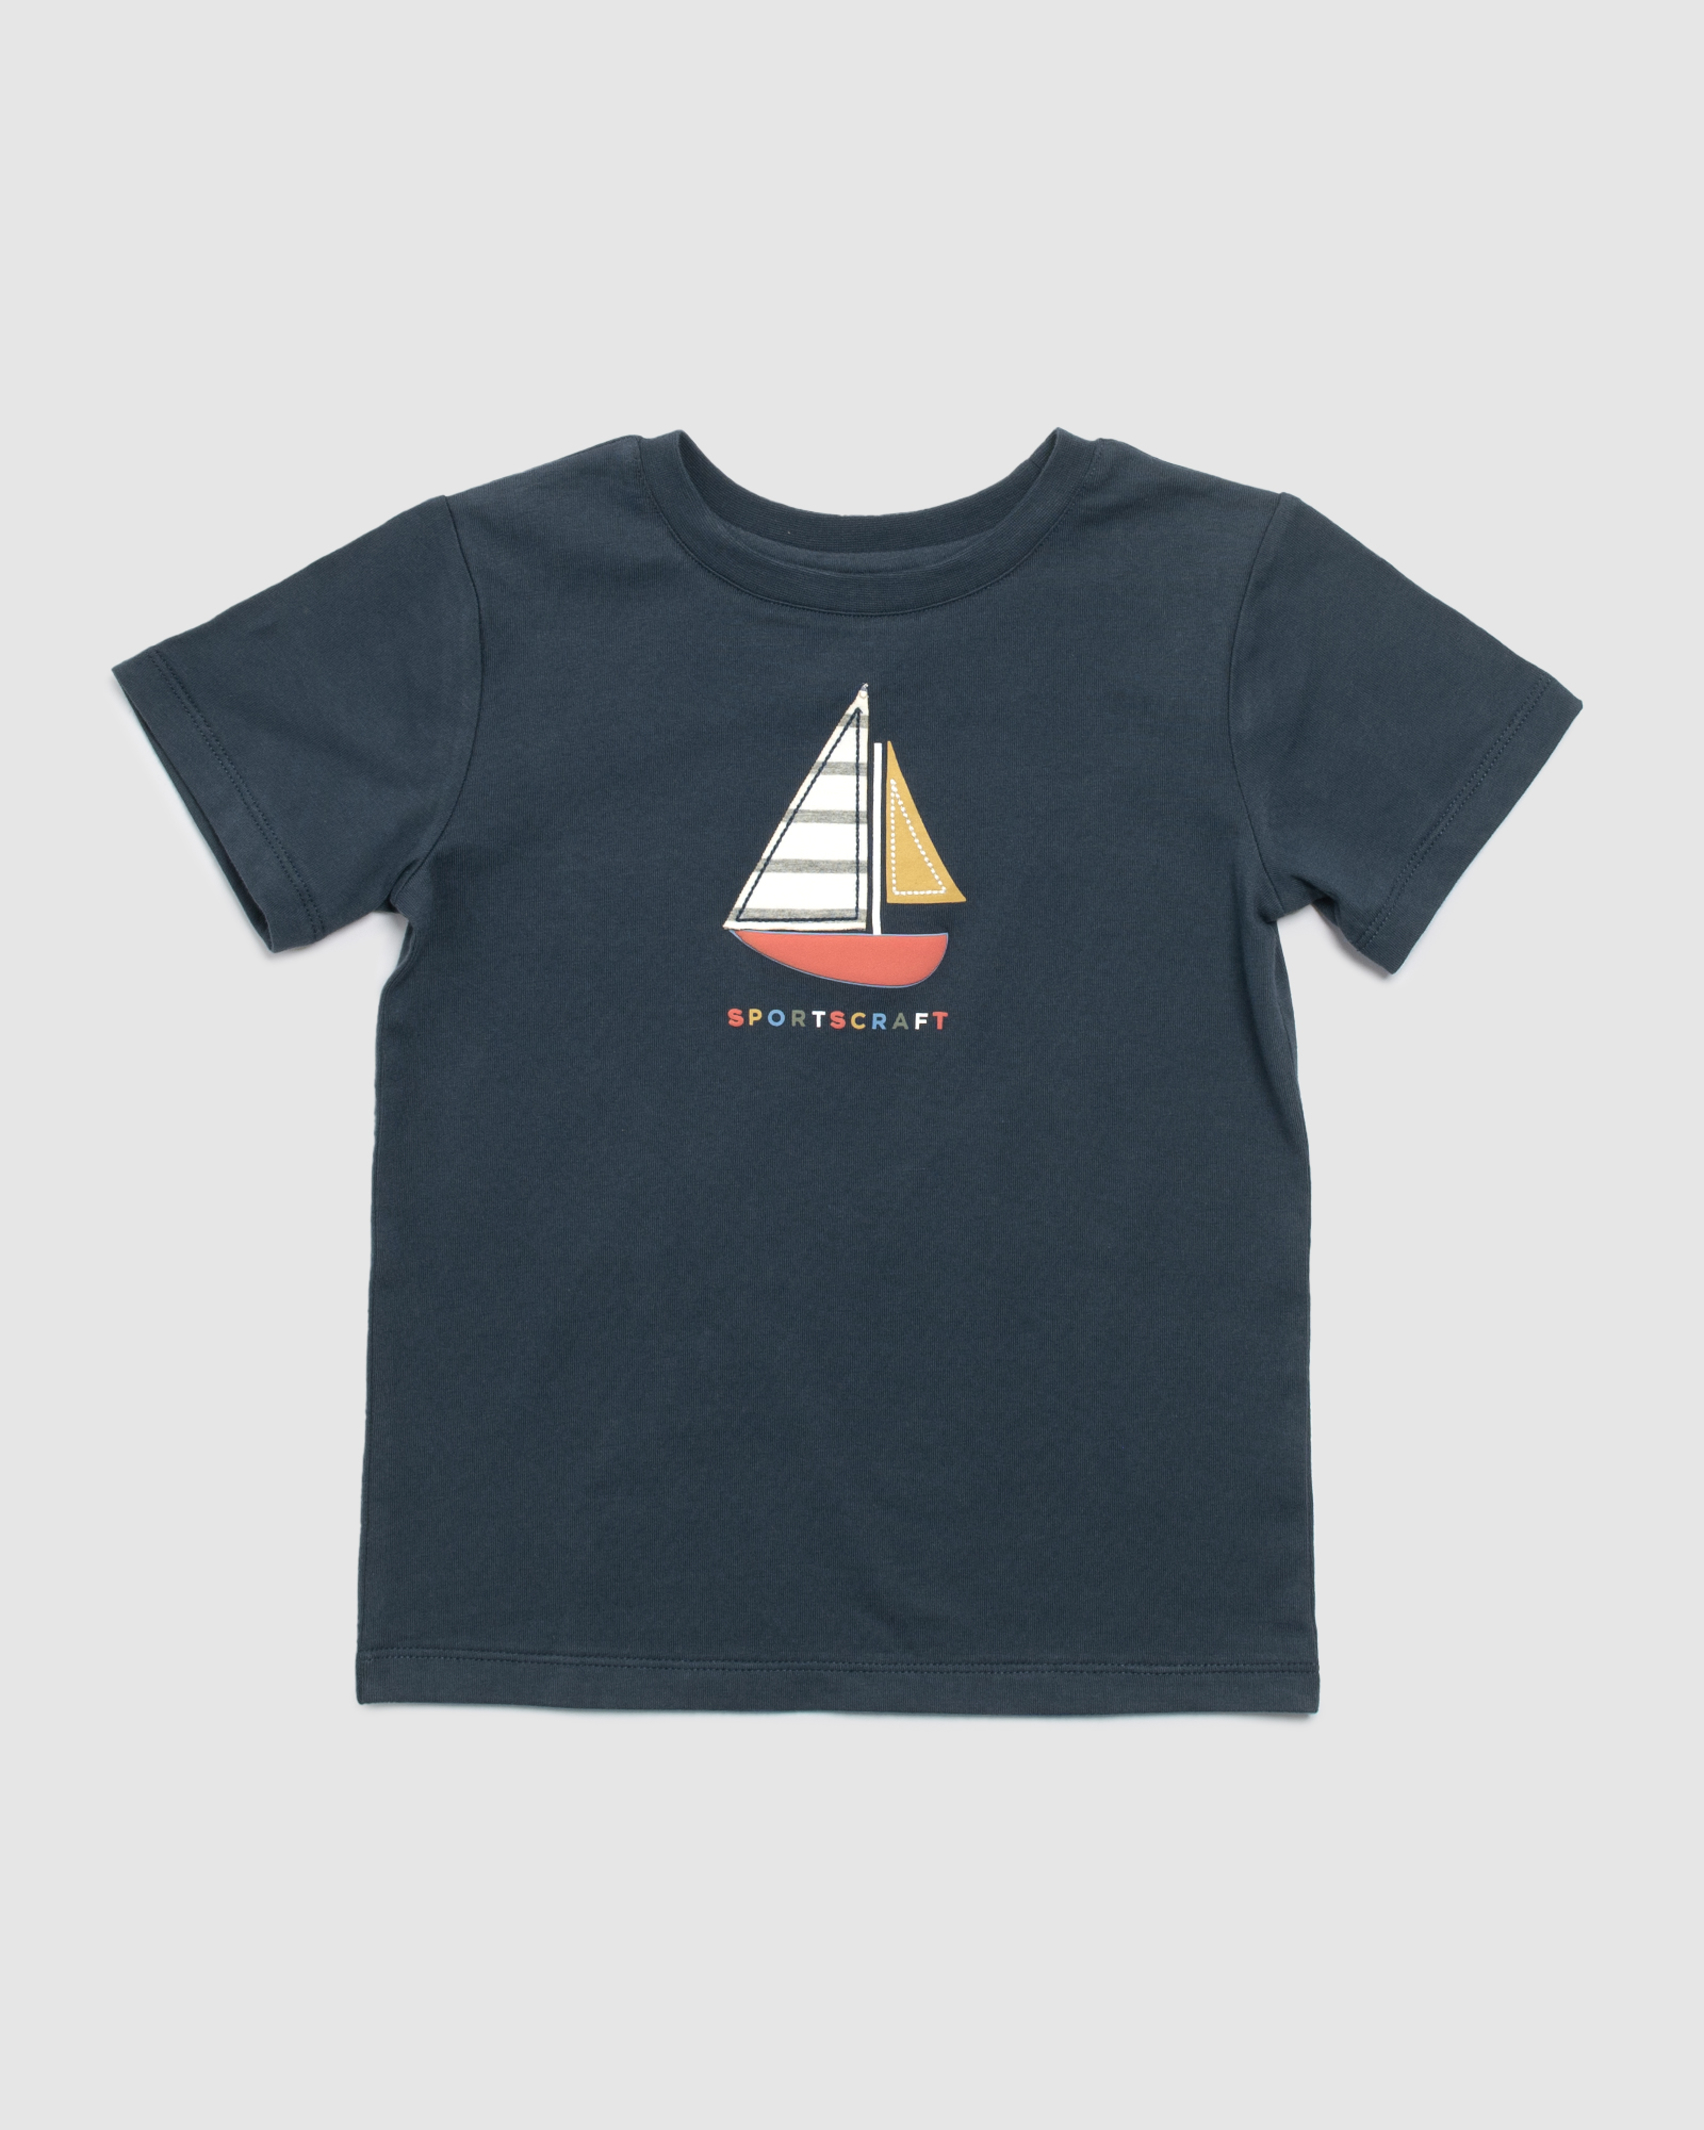 Sail Boat Cotton Short Sleeve Tee in NAVY